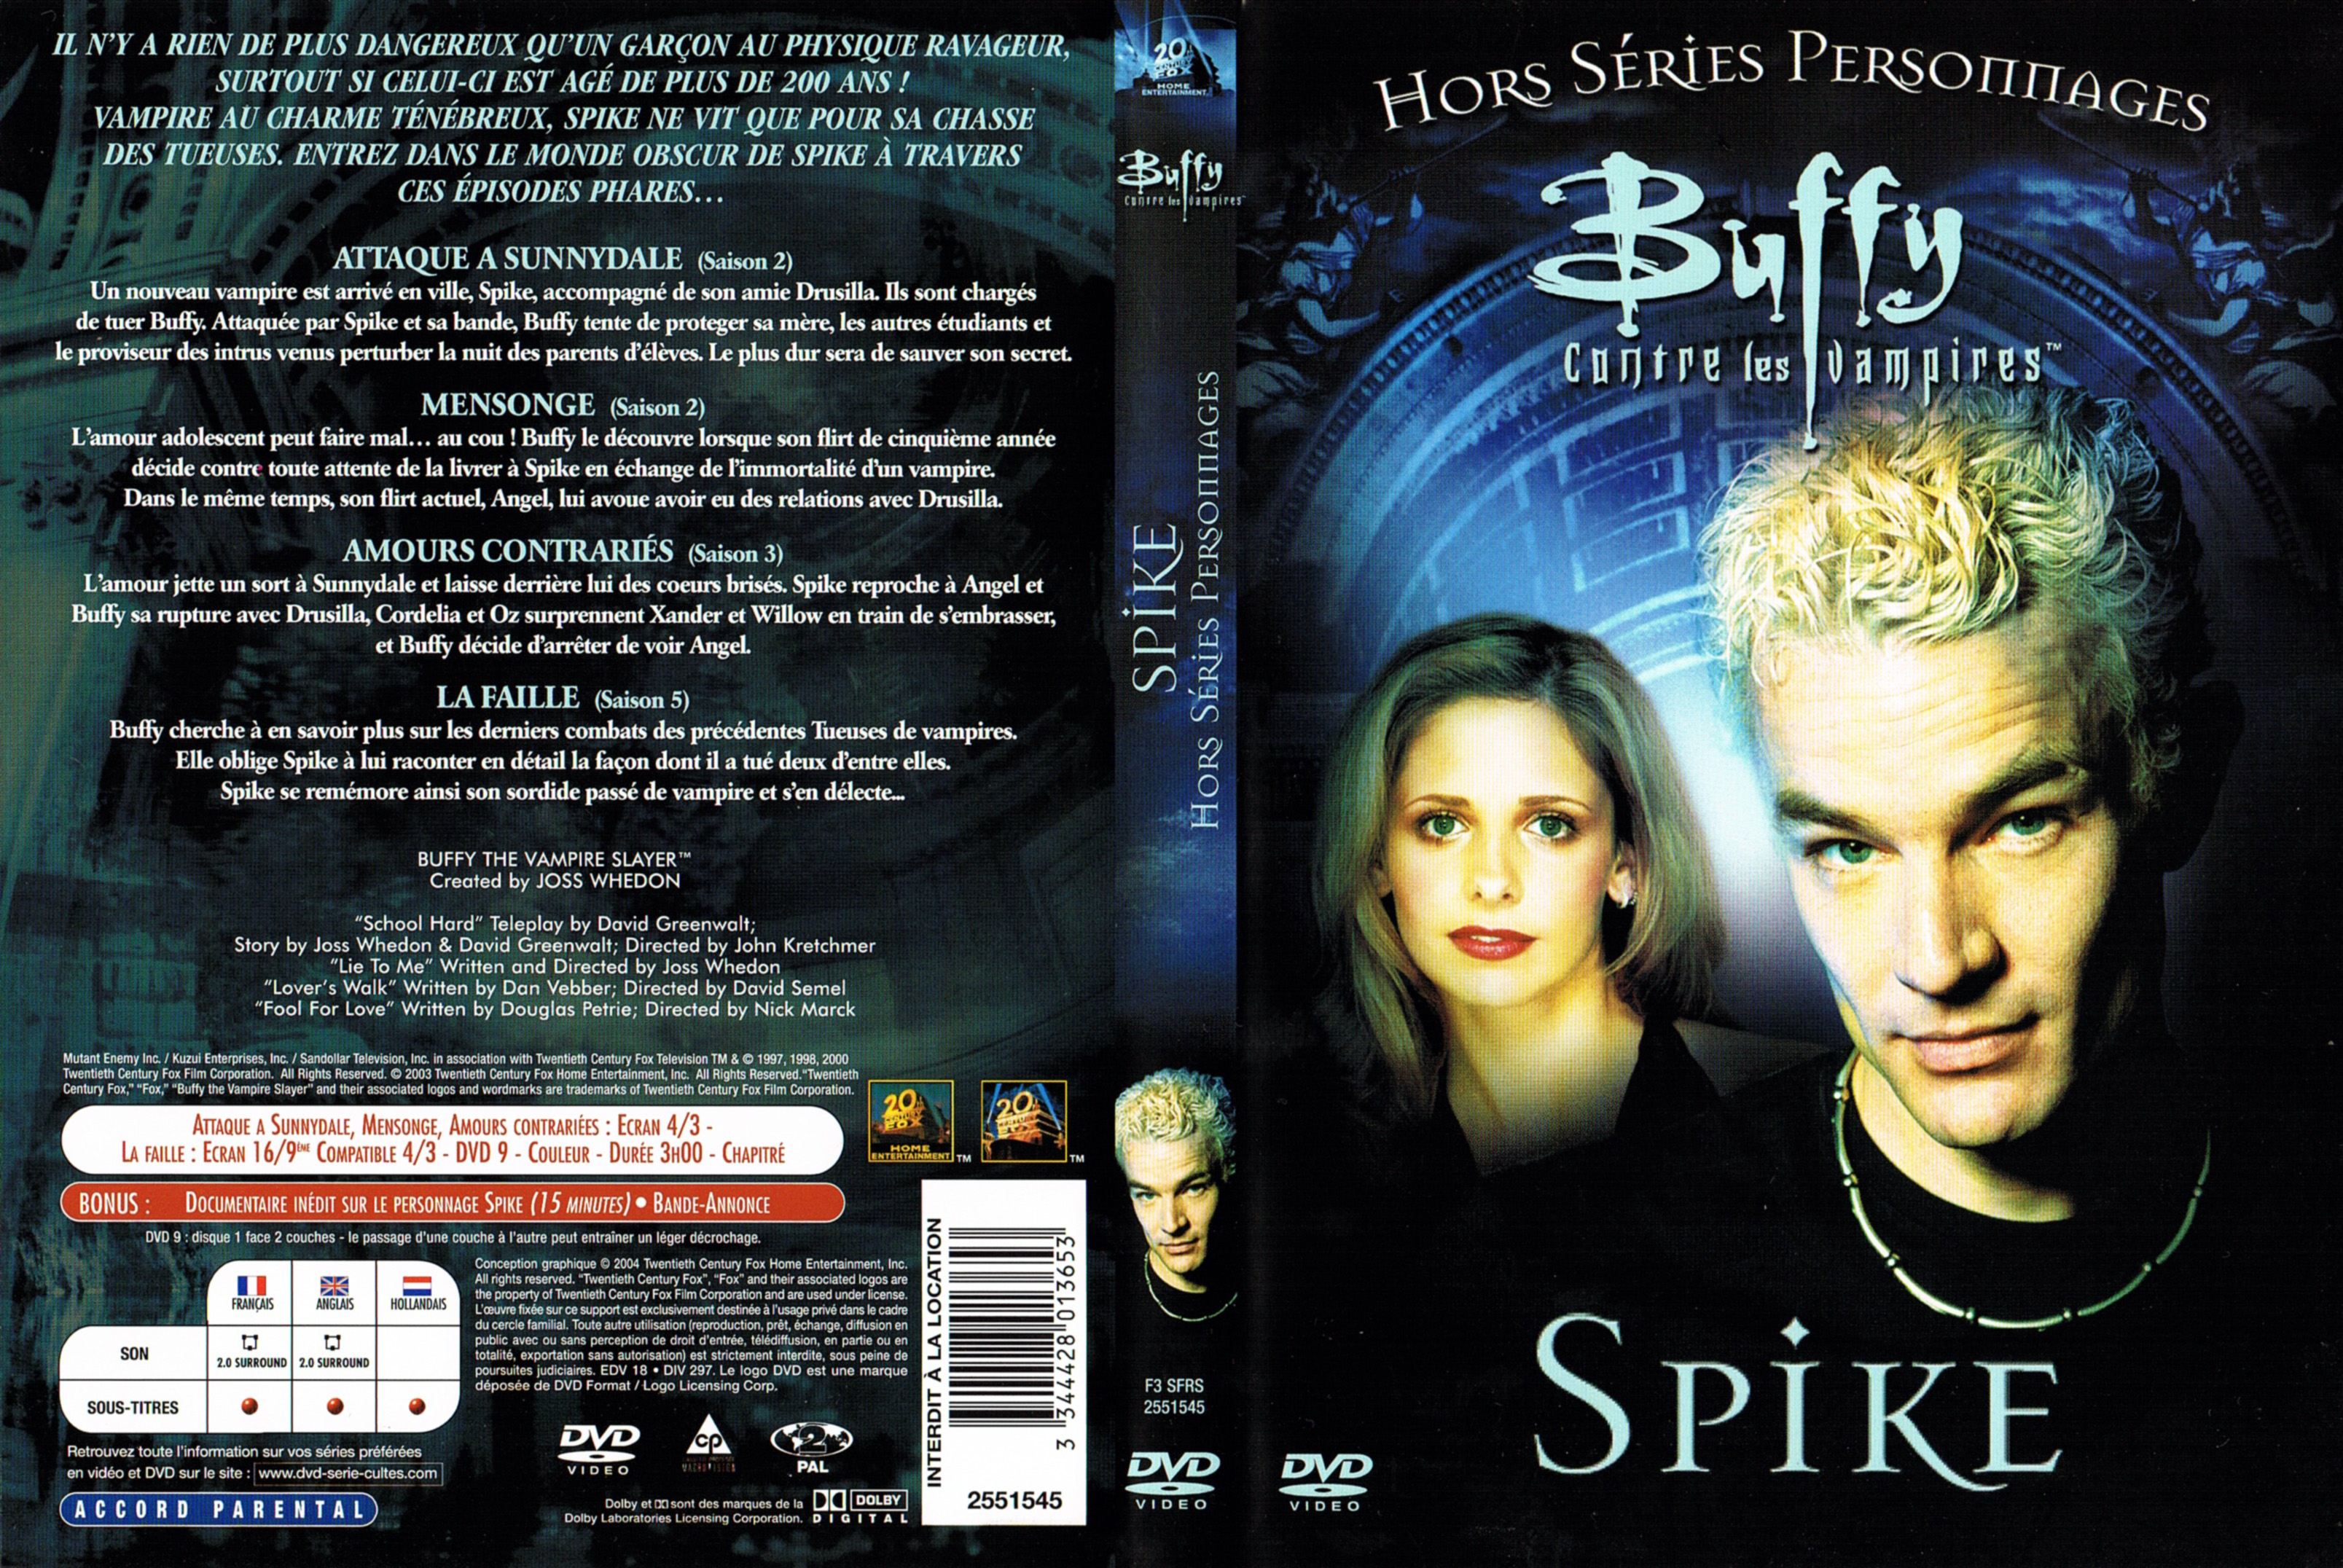 Jaquette DVD Buffy contre les vampires Special Spike